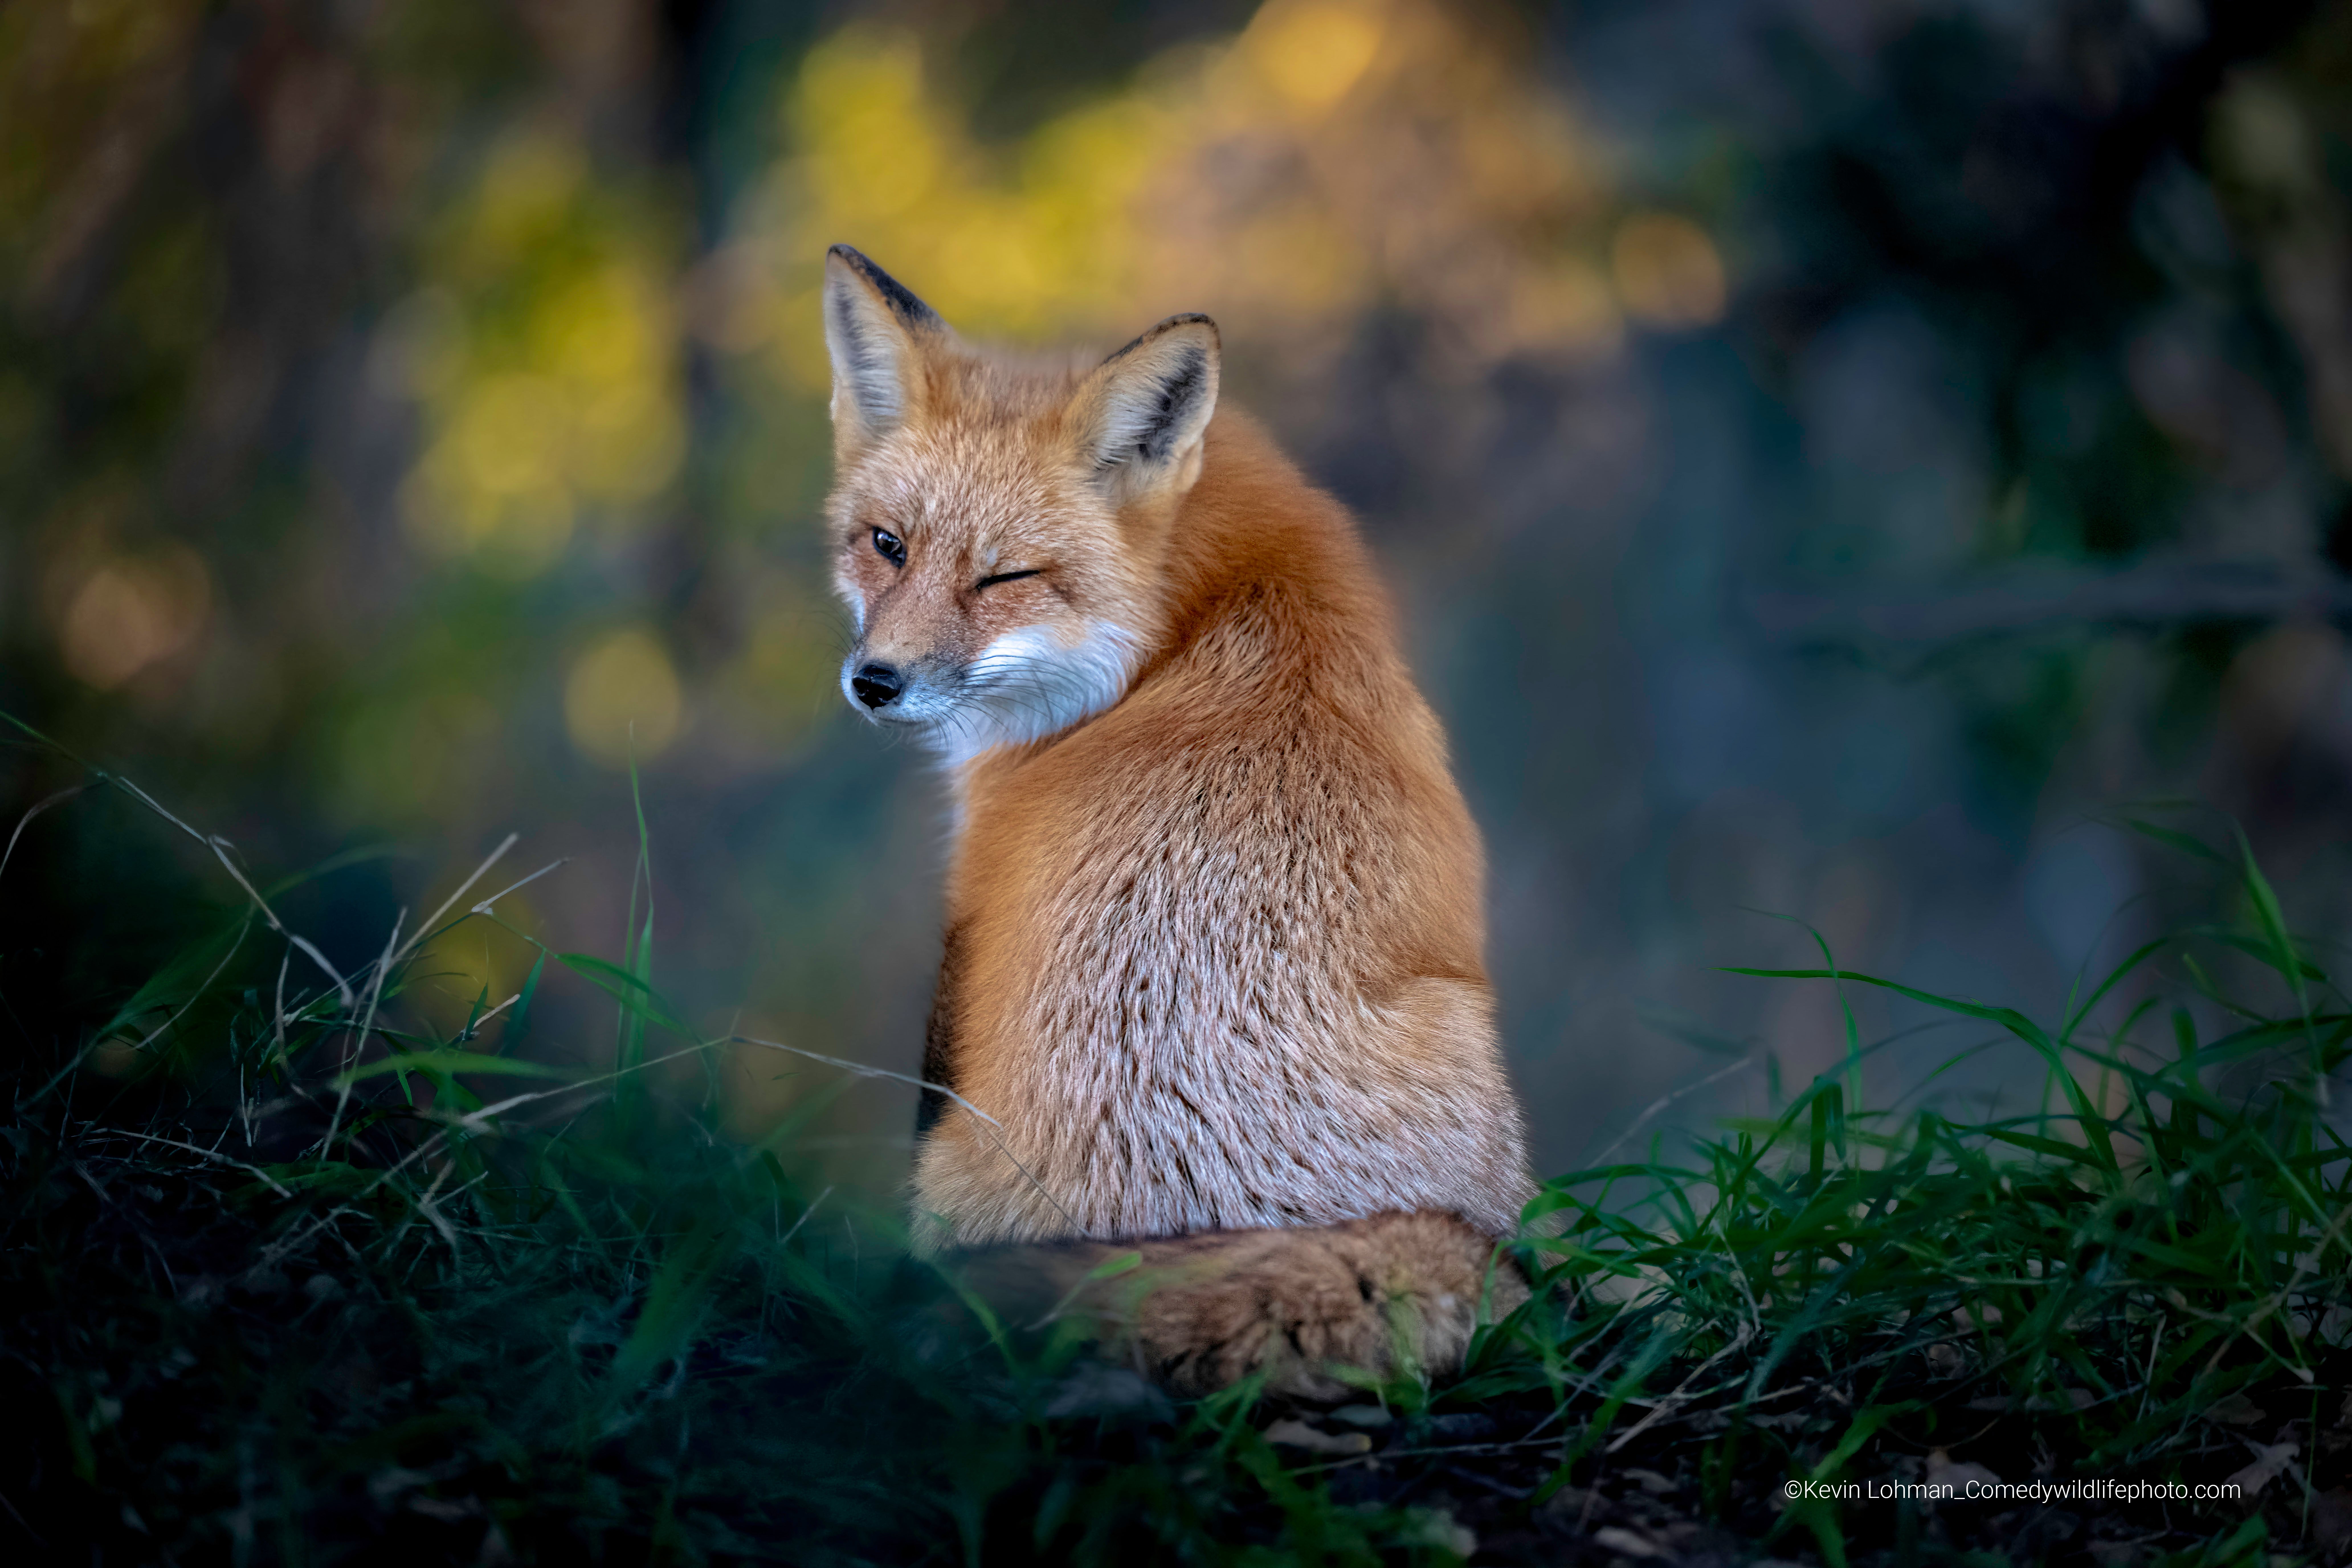 A sly fox offers the photographer a wink. (Photo: ©  Kevin Lohman / Comedywildlifephoto.com.)